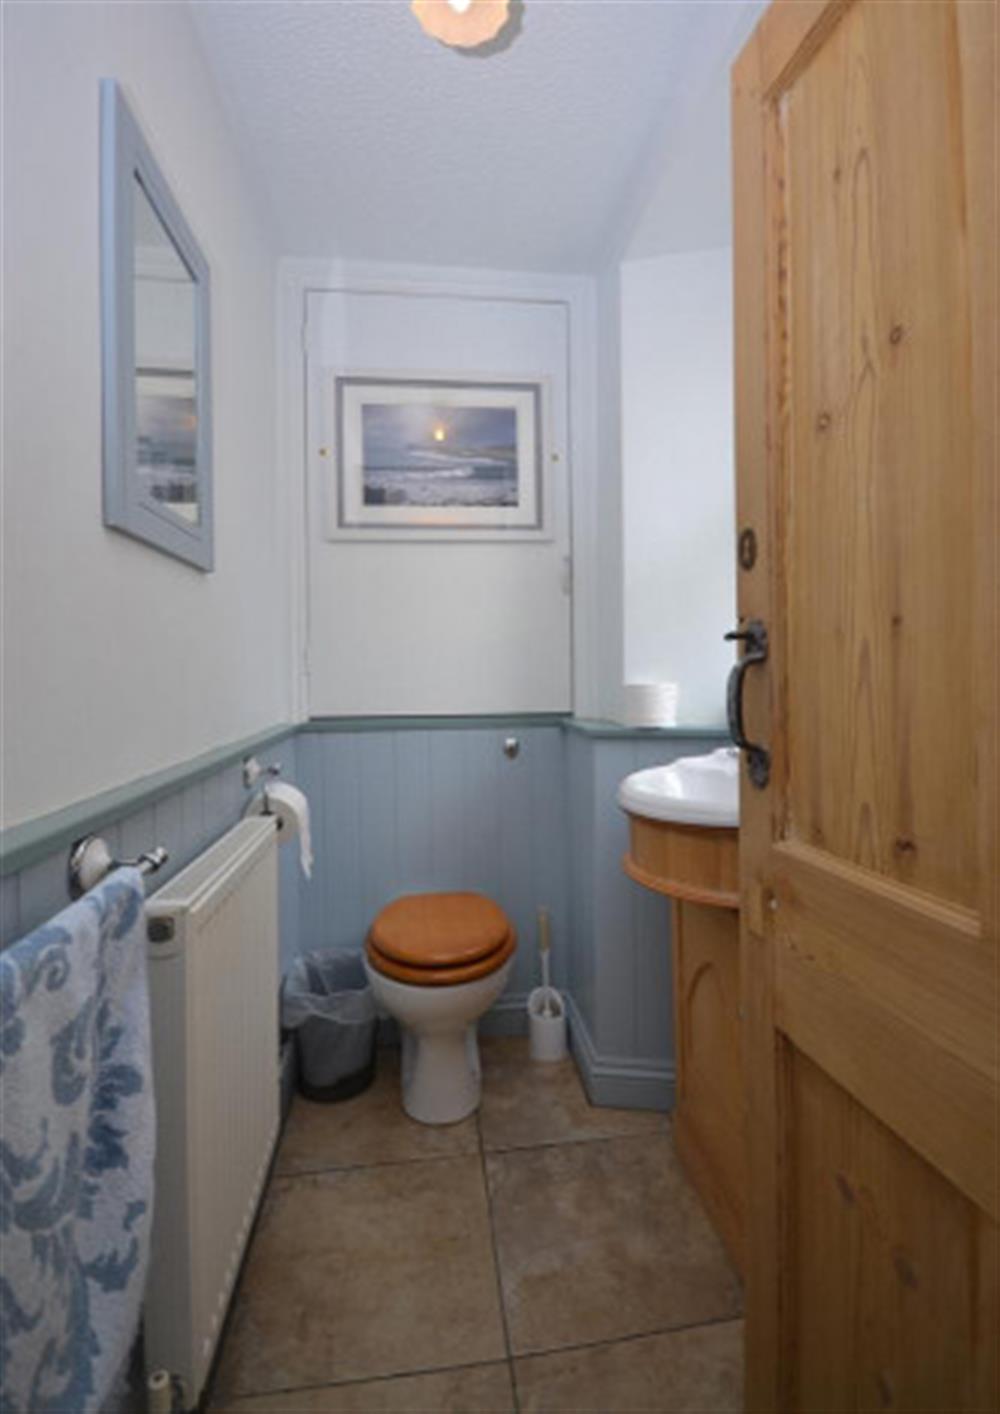 The downstairs cloakroom at Nelsons Cottage in Looe